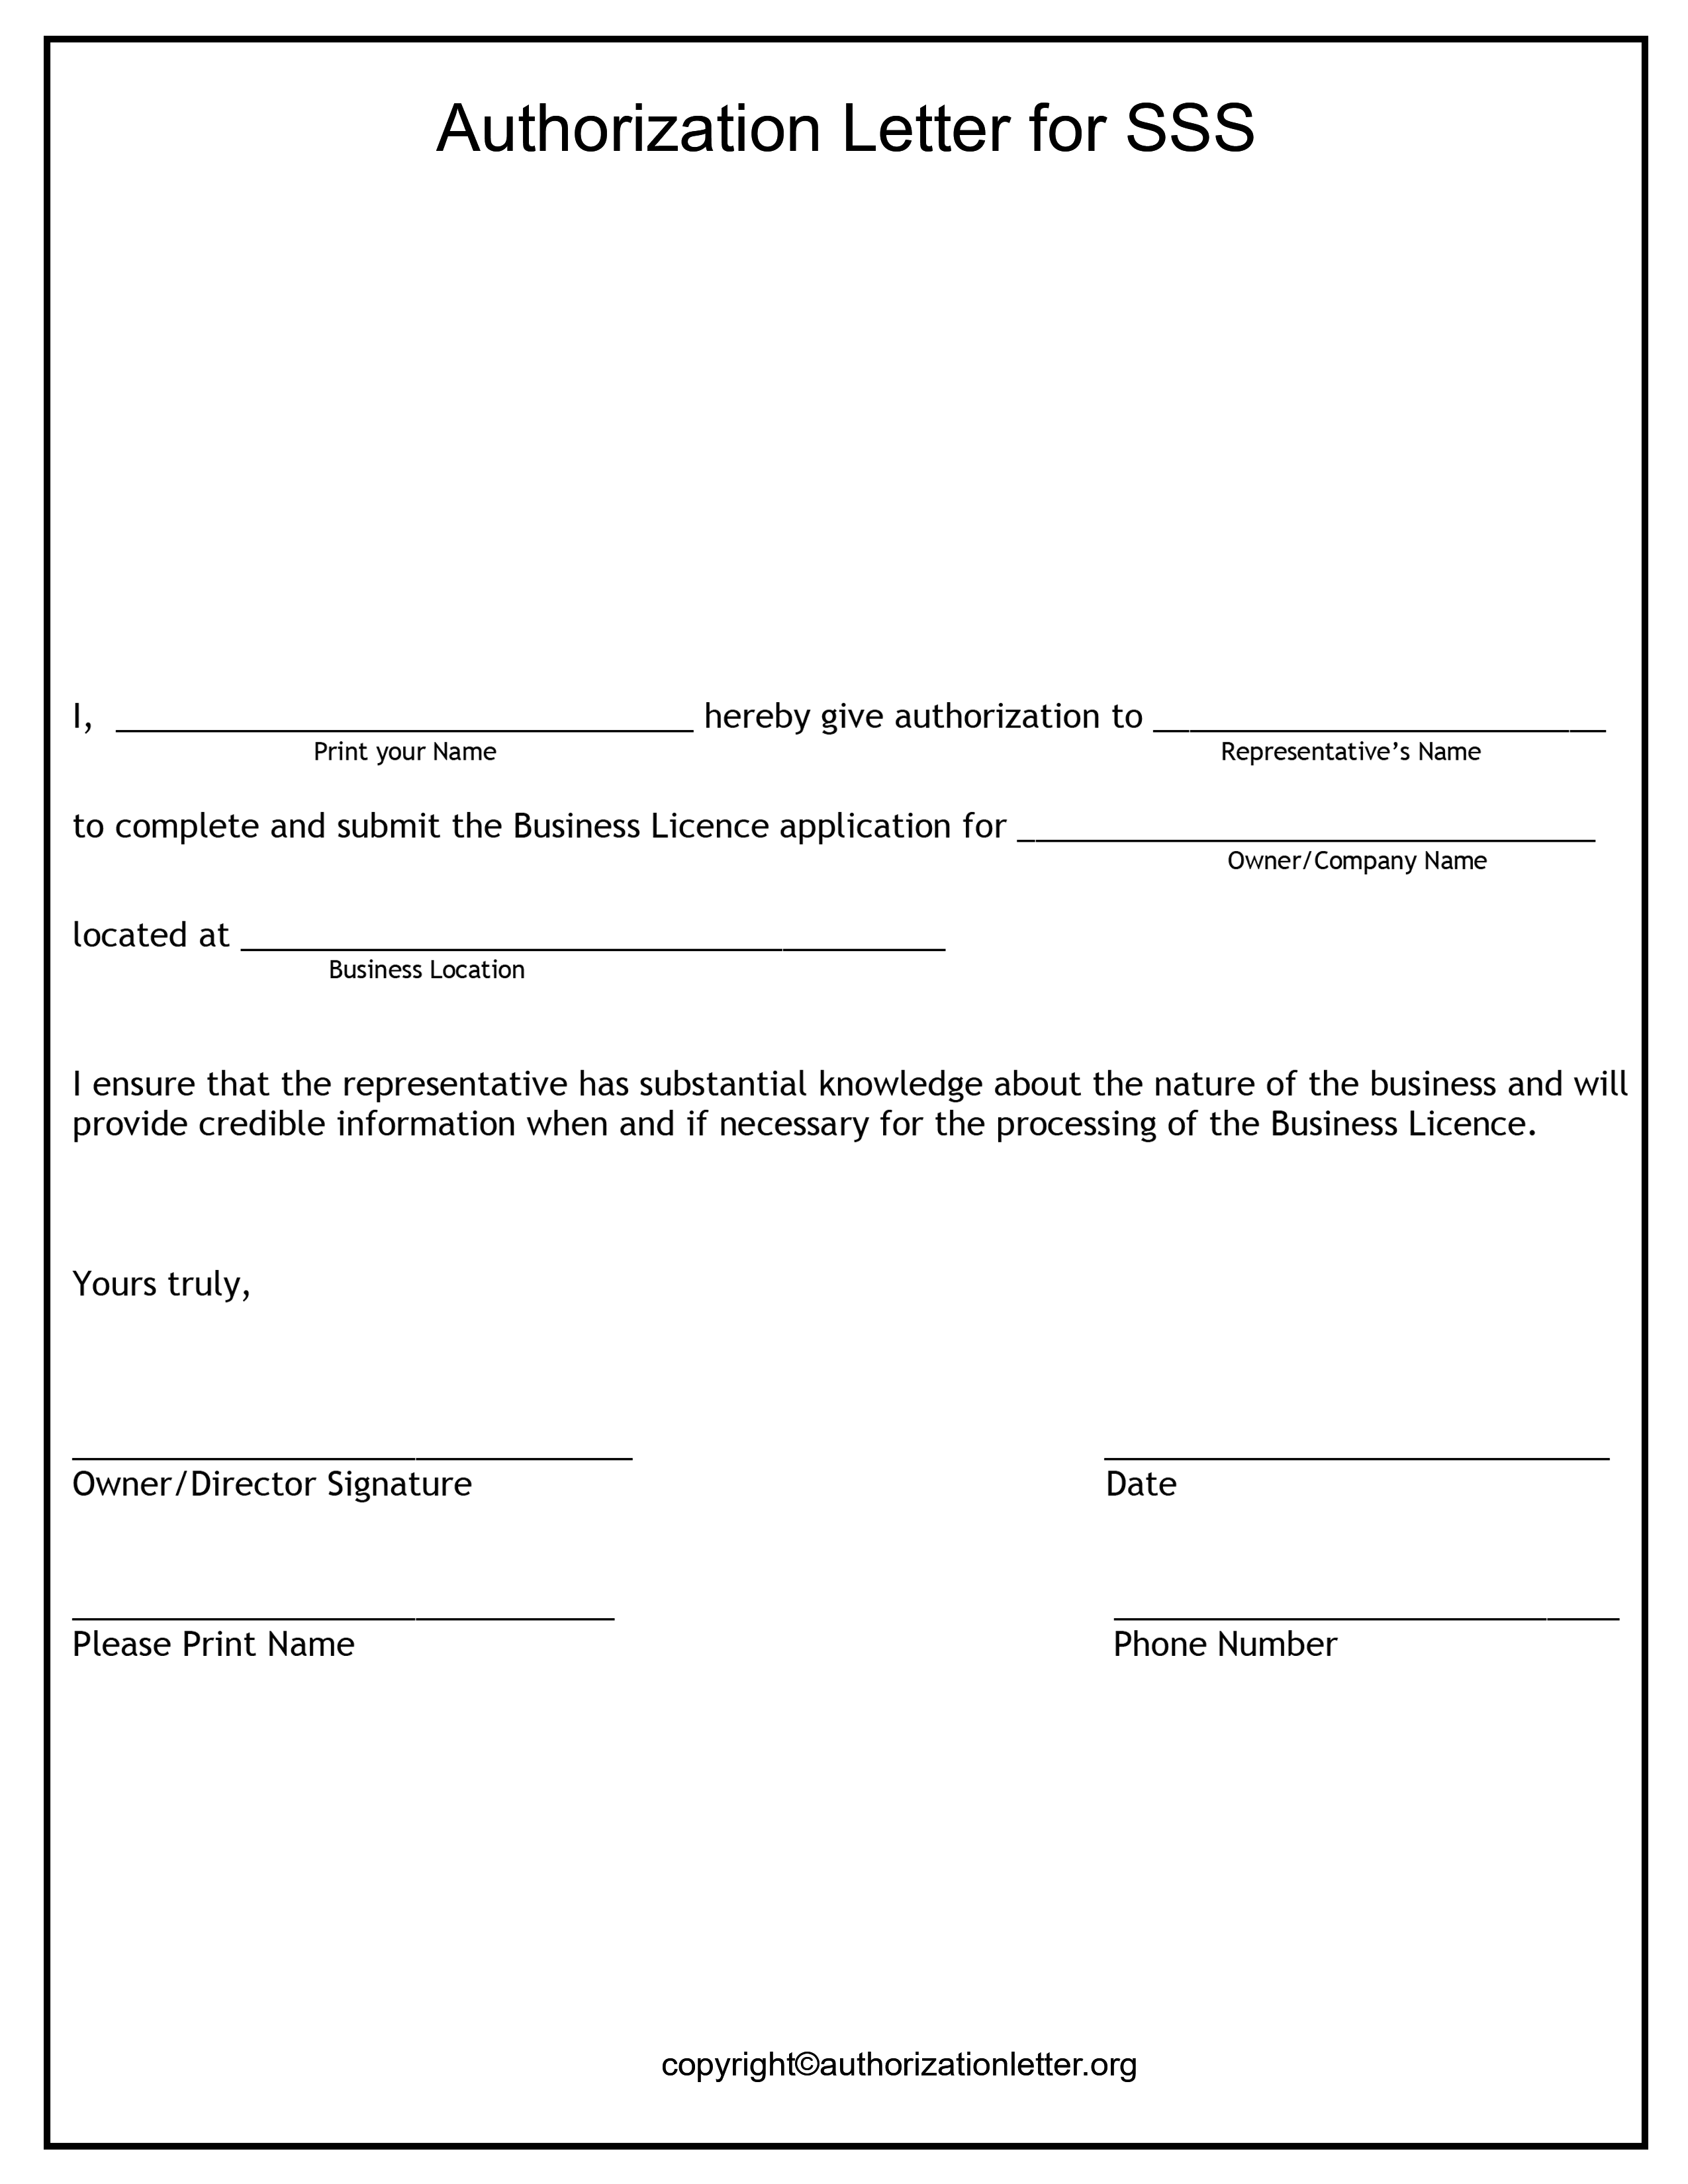 Sample Authorization Letter for SSS Company Representative